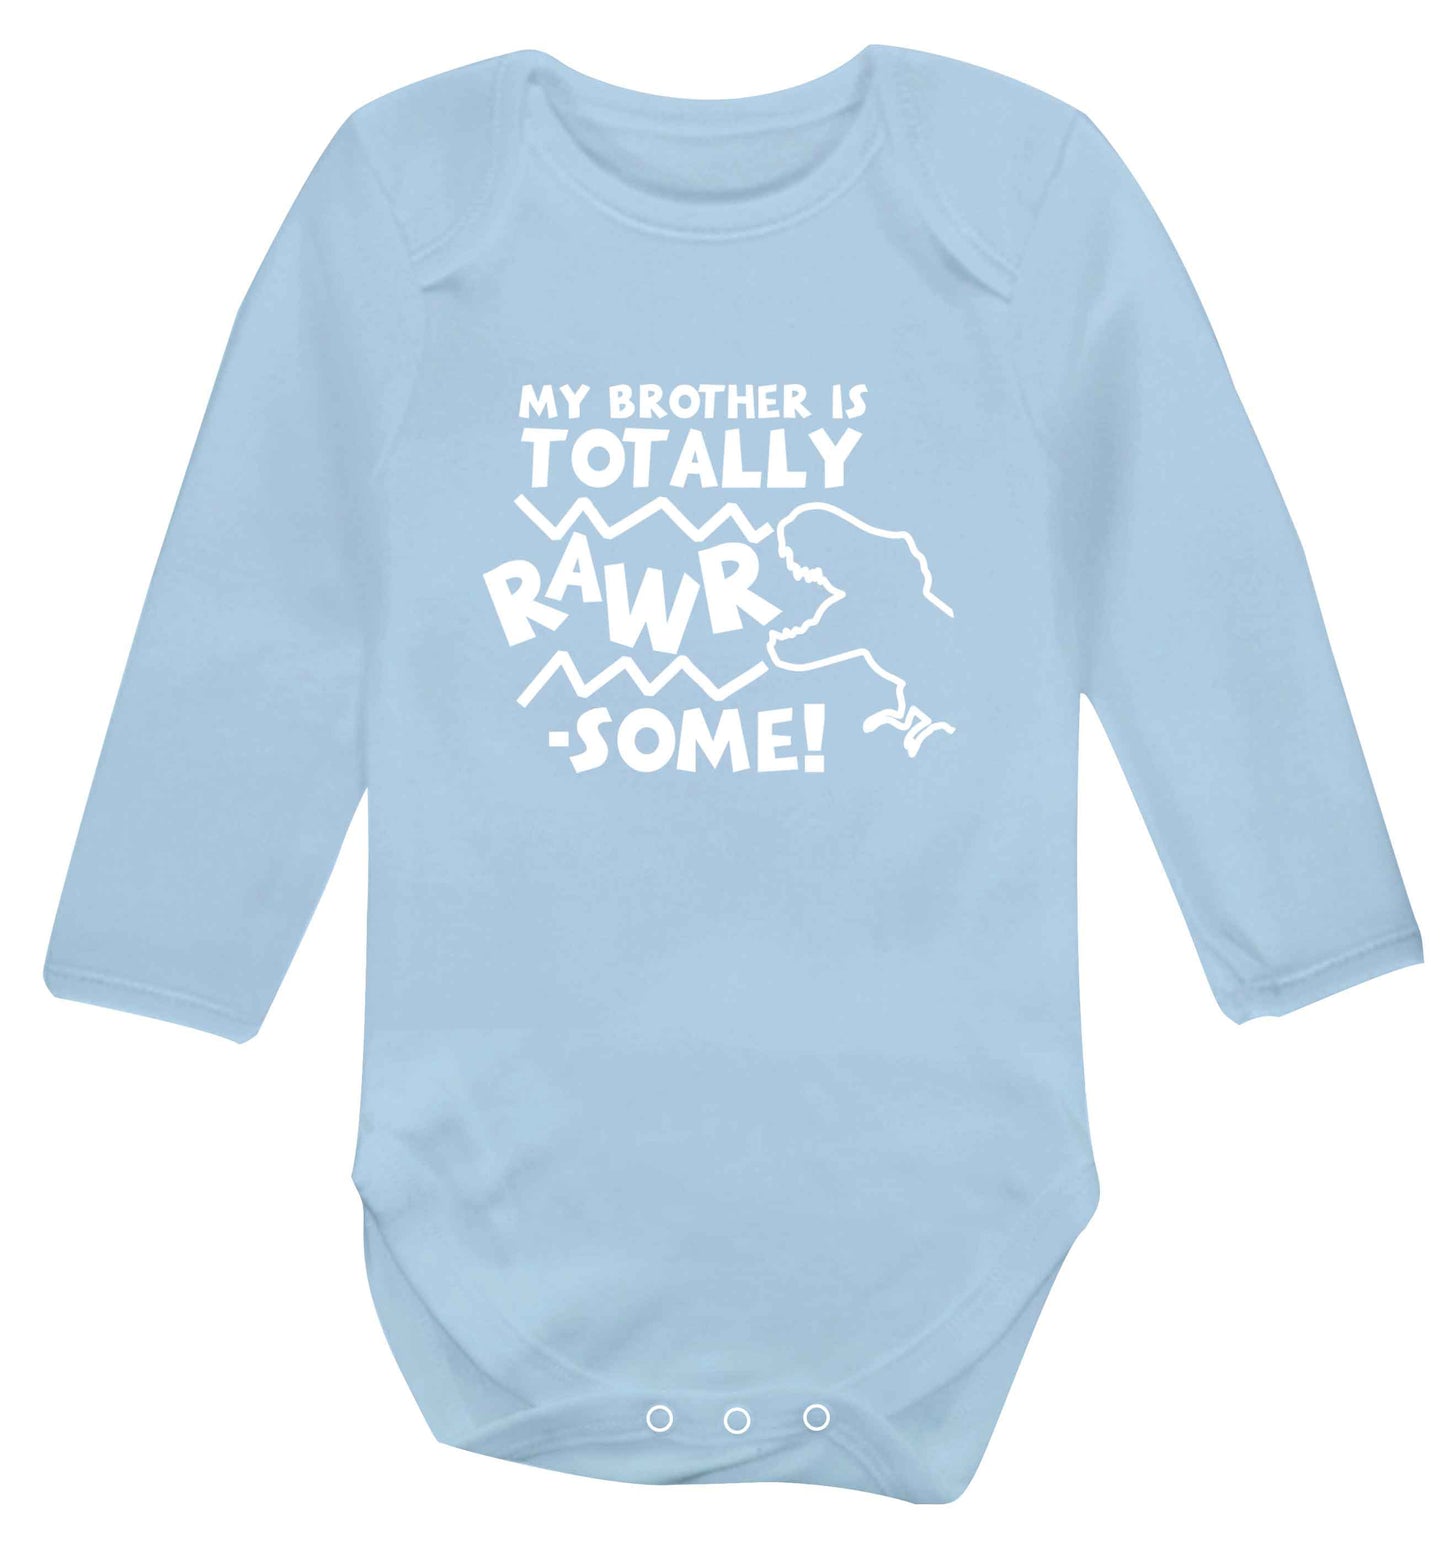 My brother is totally rawrsome baby vest long sleeved pale blue 6-12 months